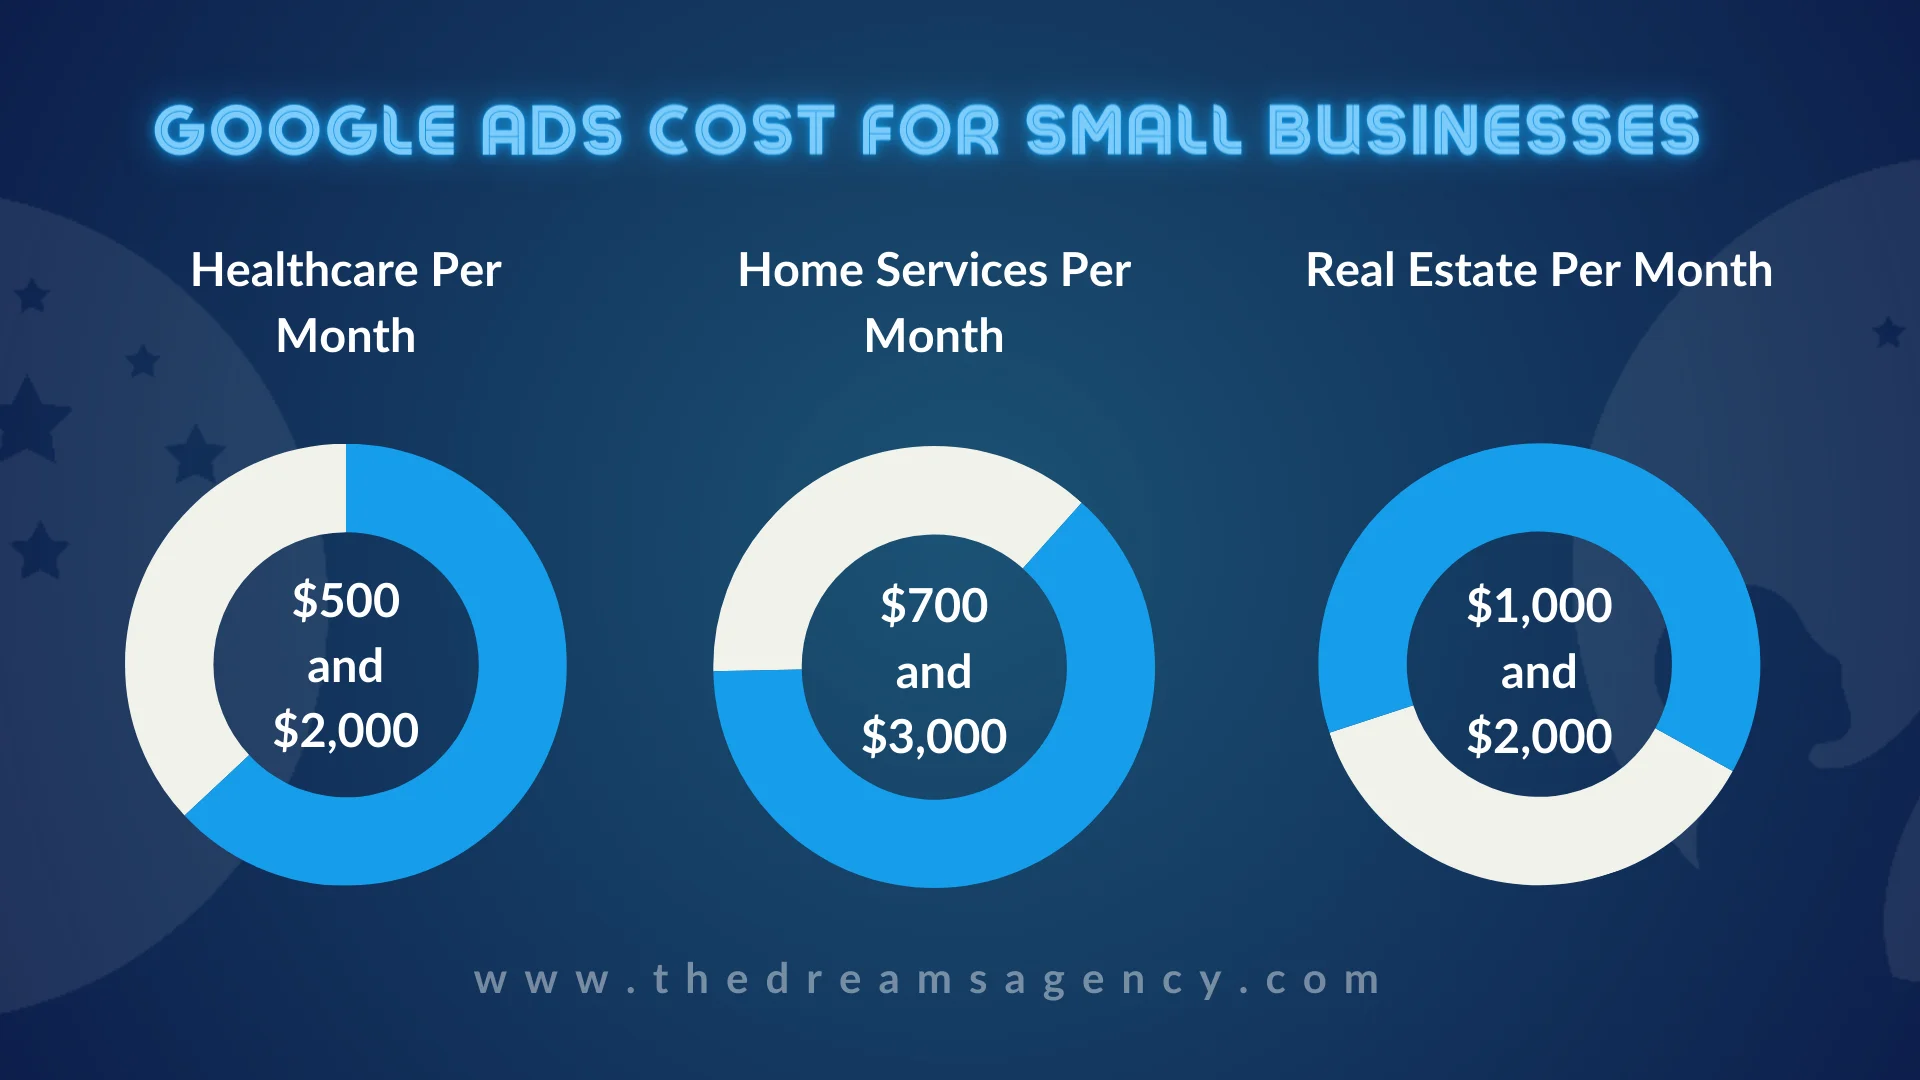 An infographic about Google ads cost for small businesses